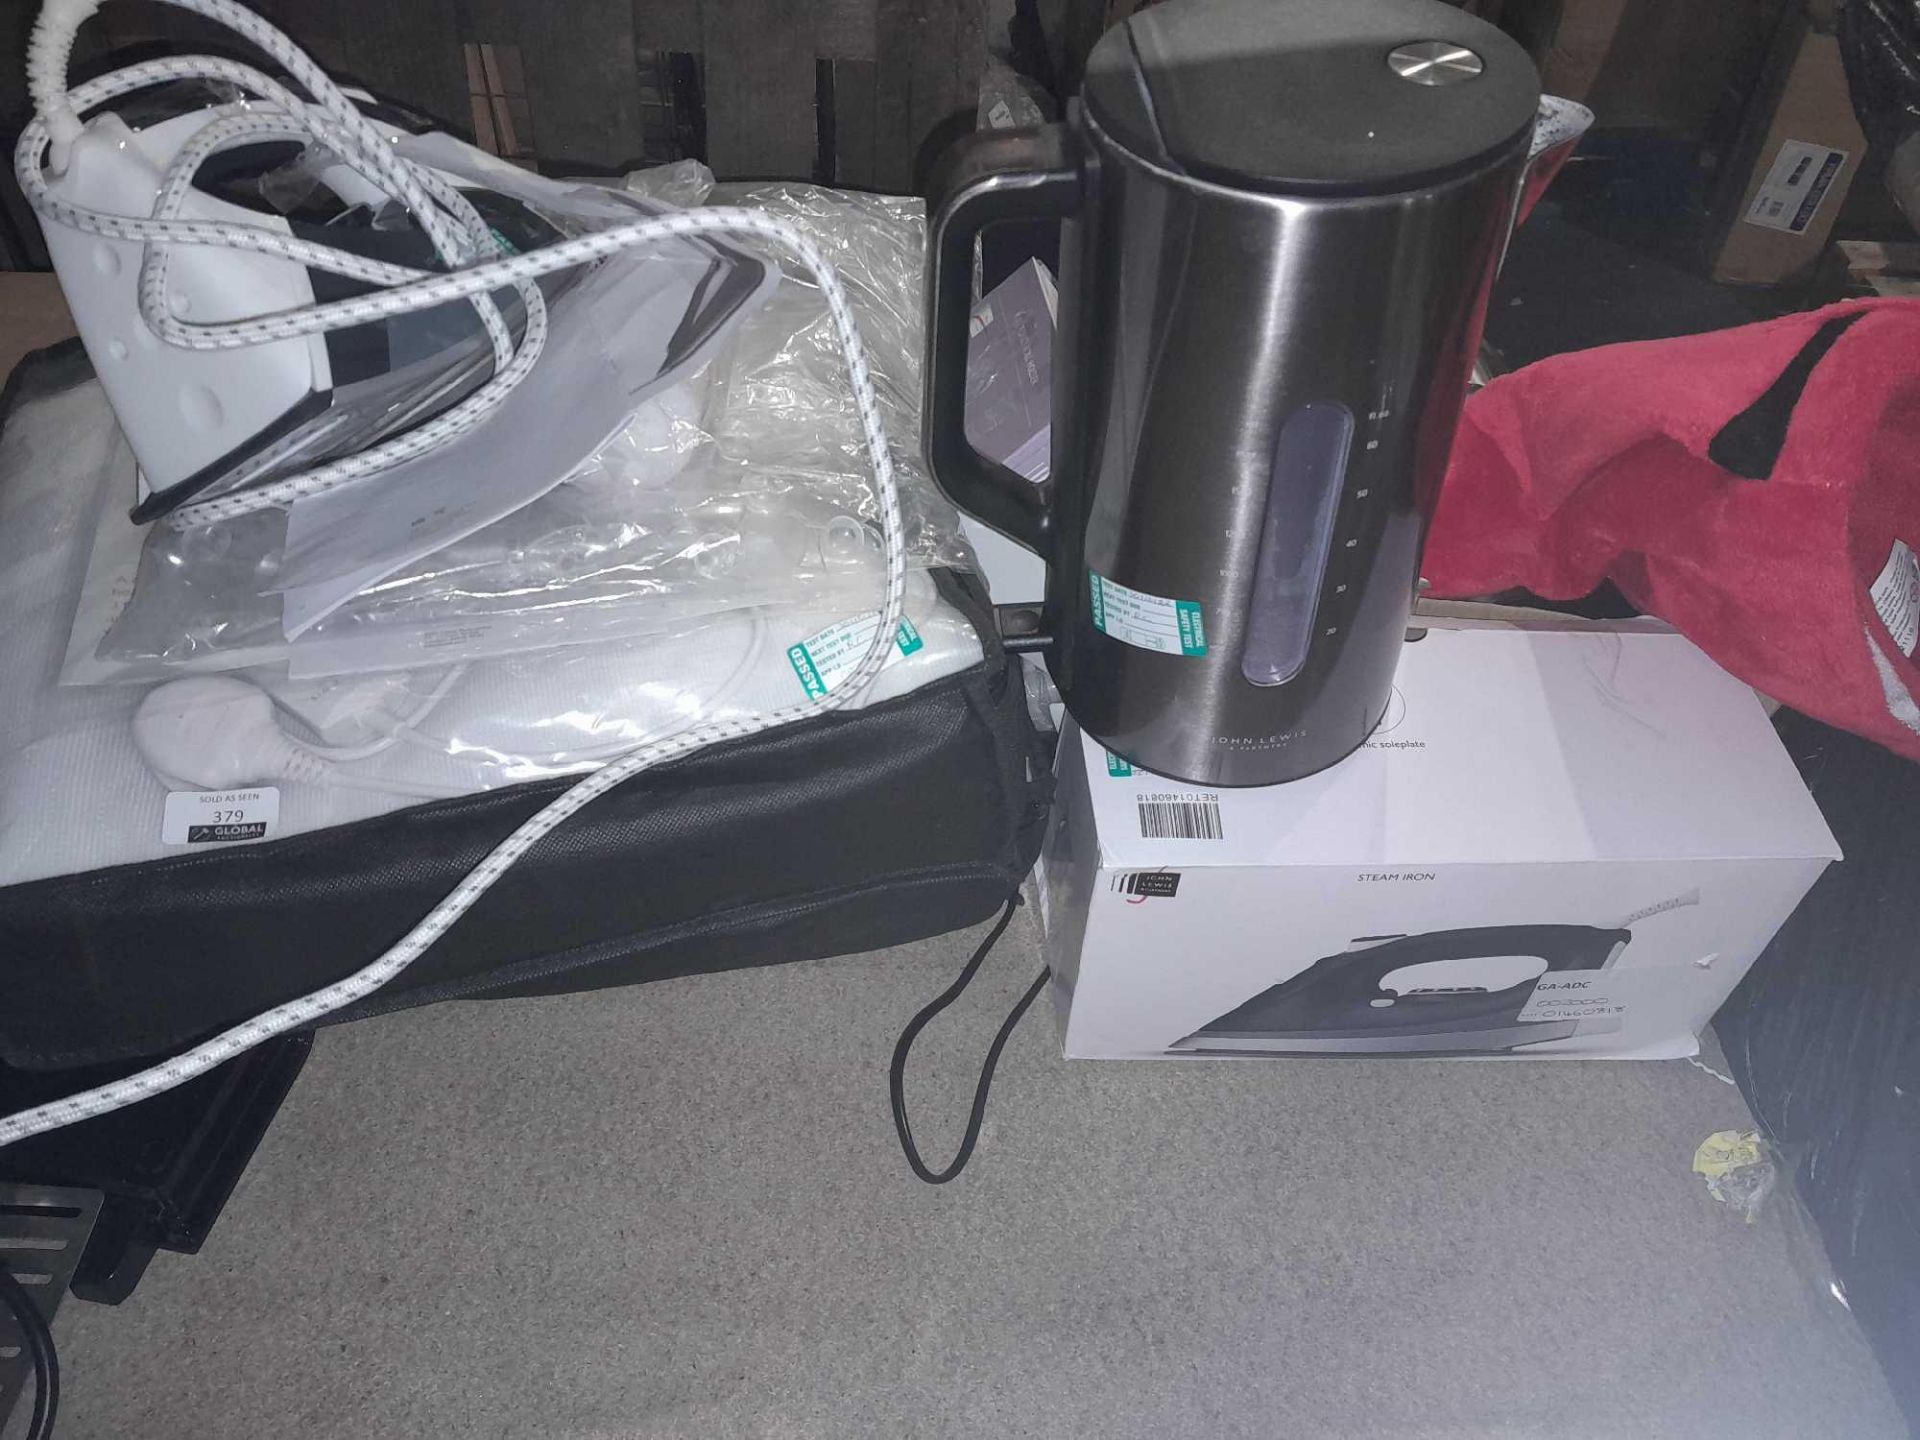 RRP £220 Lot To Contain Approx. 10 Assorted John Lewis Items, Steam Iron, Simplicity Kettle, Single - Image 3 of 3